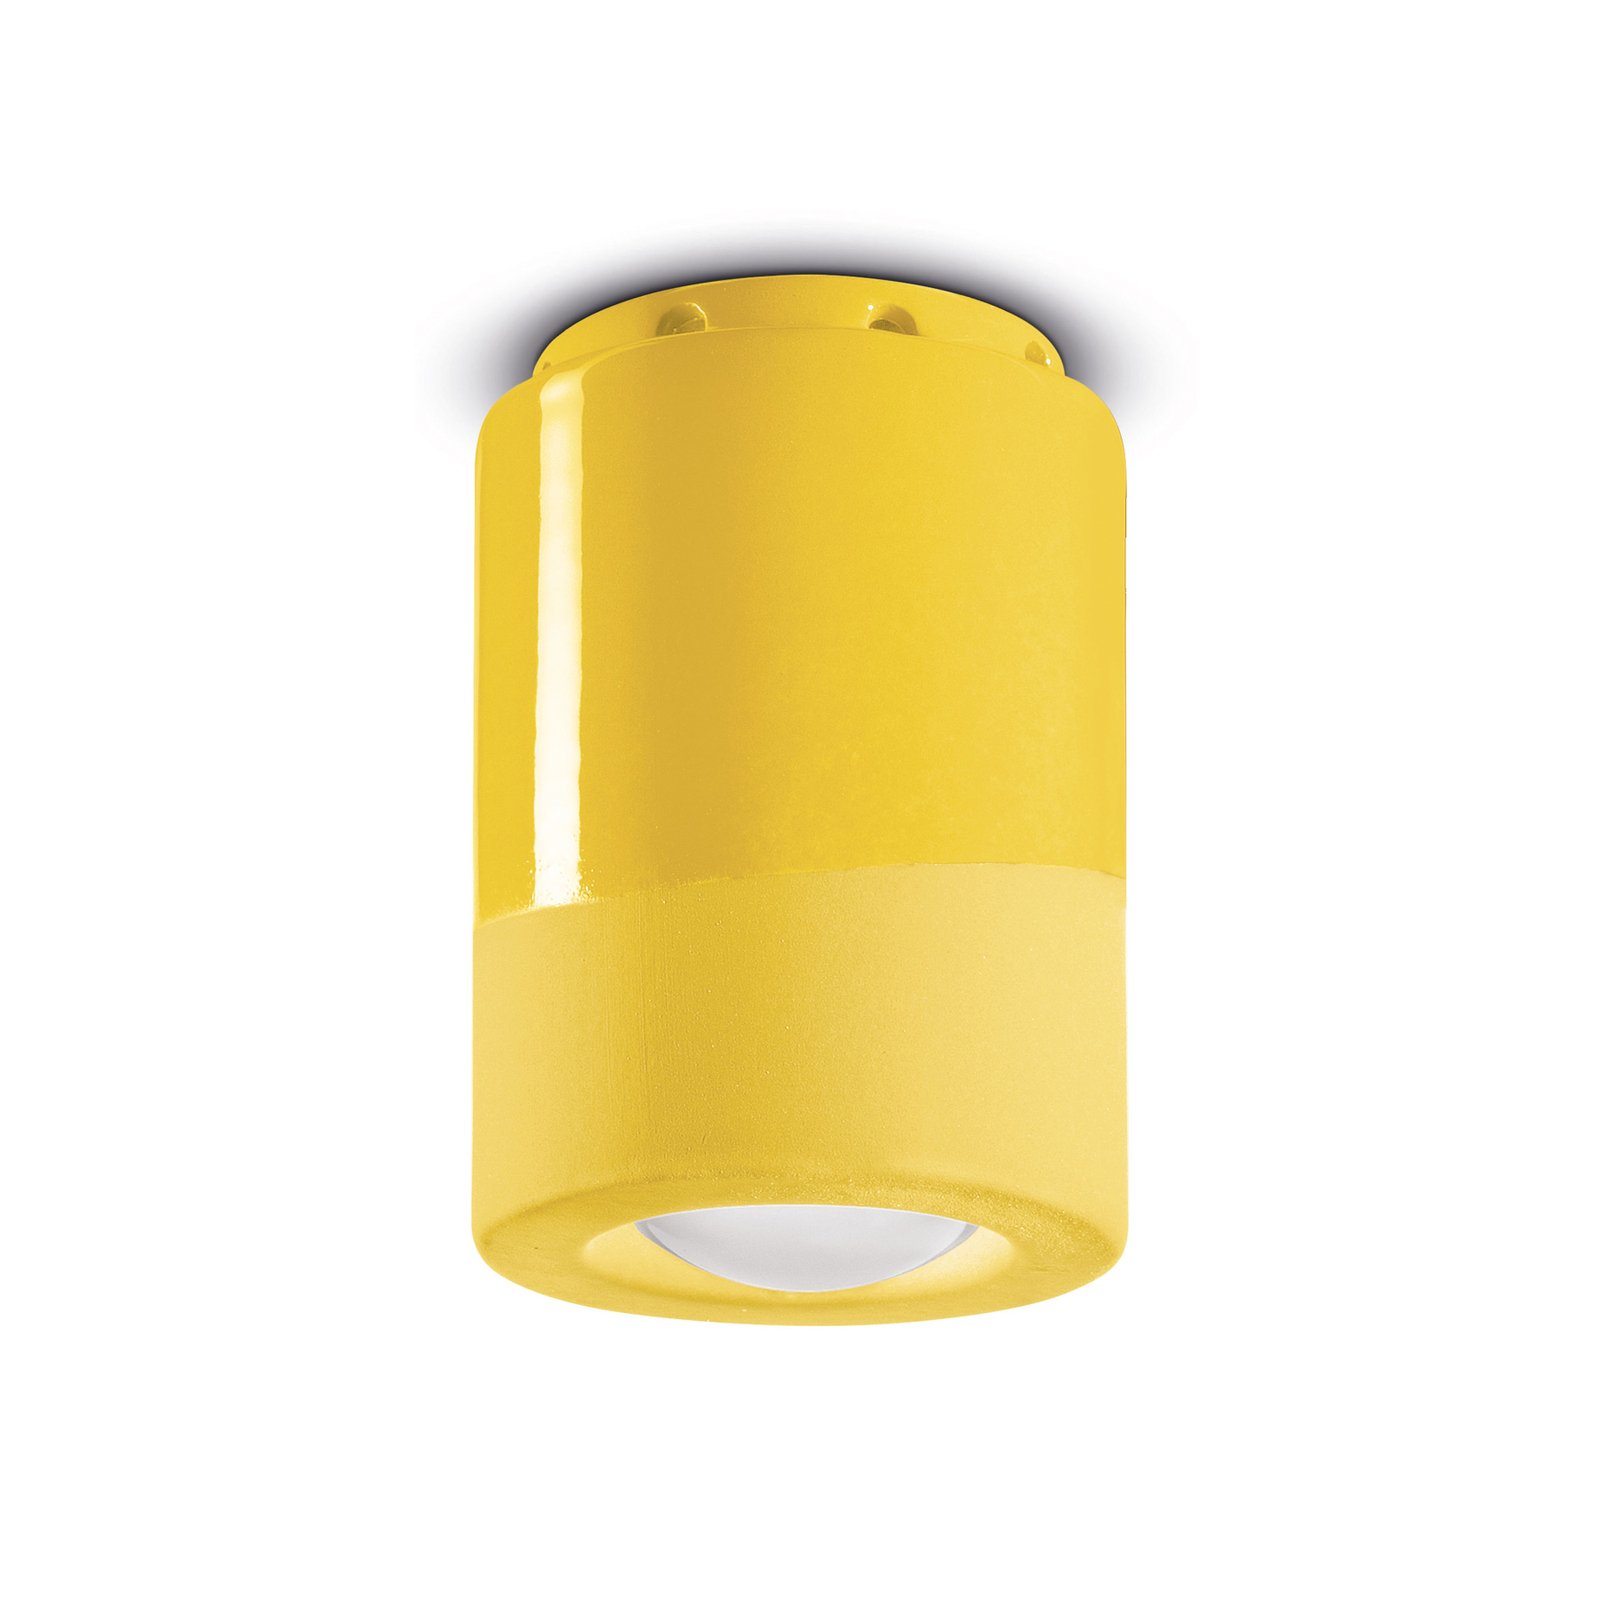 PI ceiling lamp, cylindrical, Ø 8.5 cm, yellow